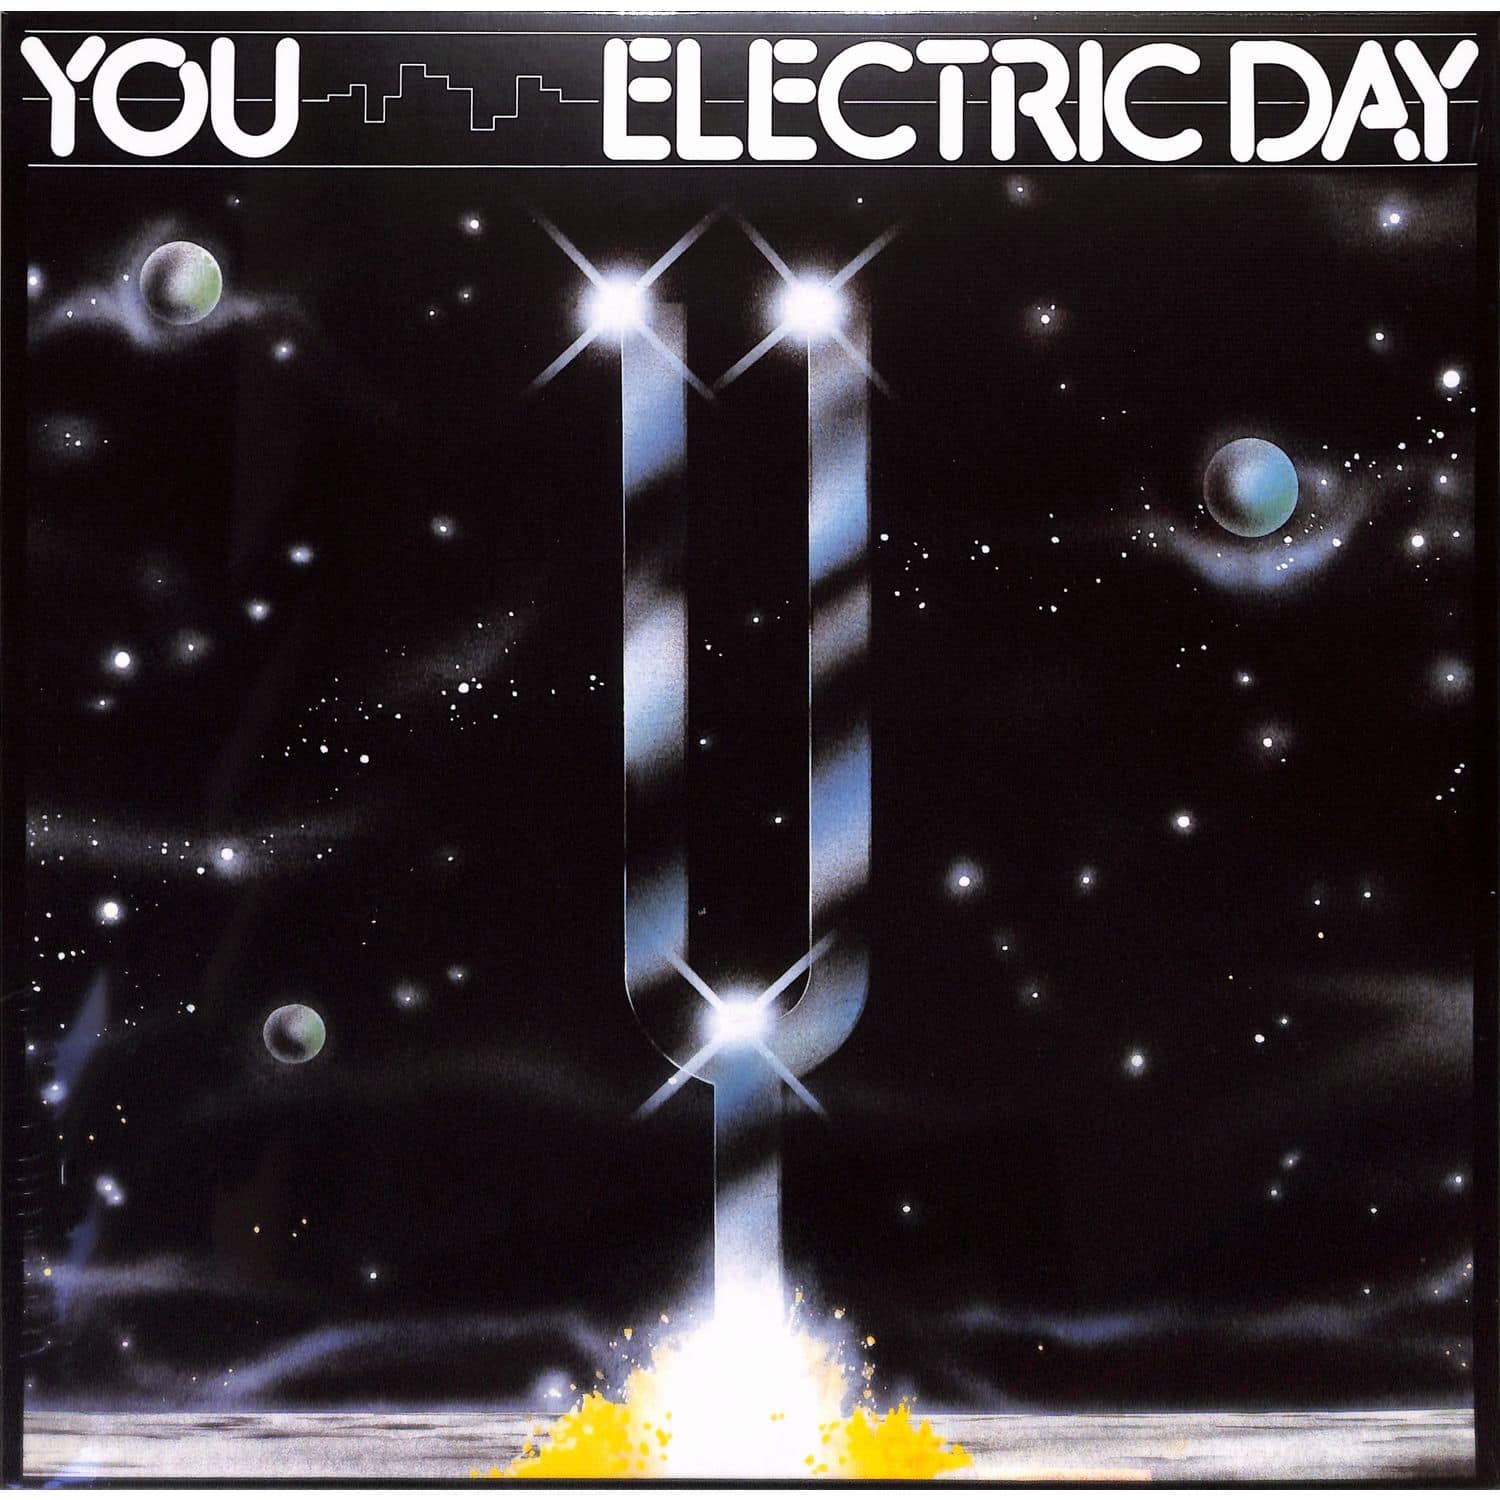 2 You - ELECTRIC DAY 